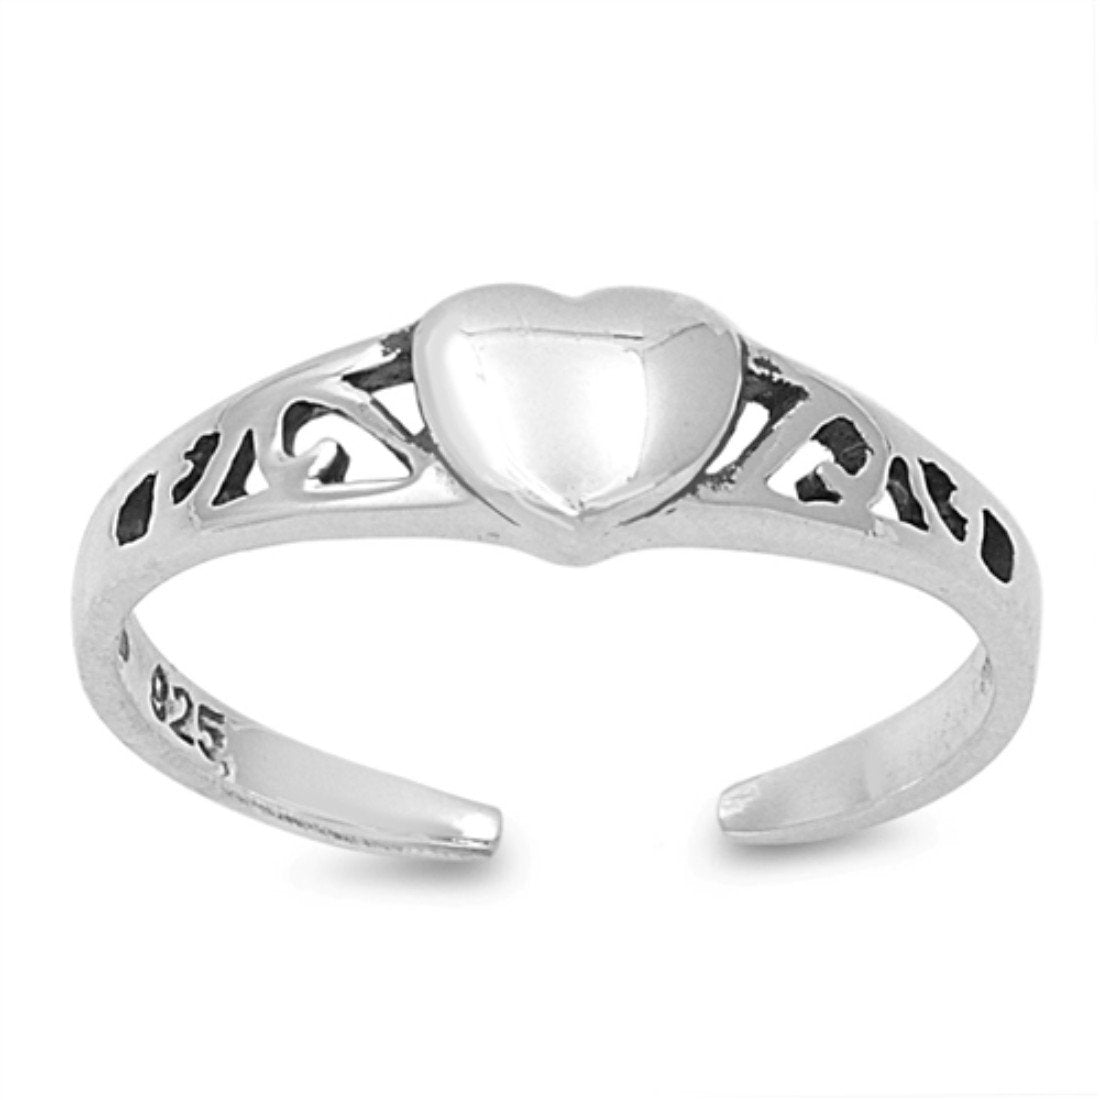 Heart Silver Toe Ring Adjustable Band For Women 925 Sterling Silver (4mm)